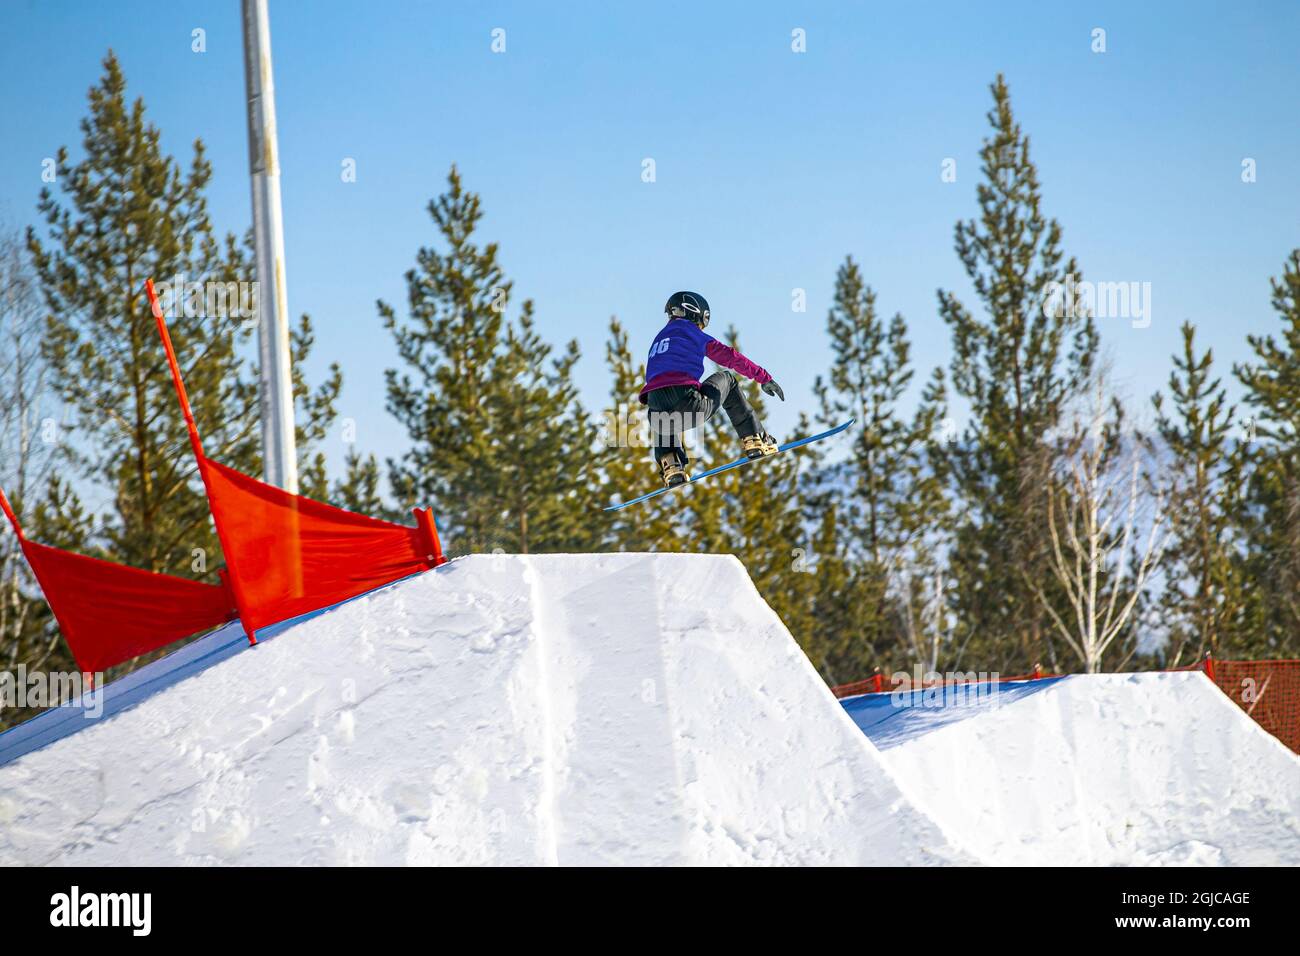 athlete snowboarder jump in snowboard competition Stock Photo